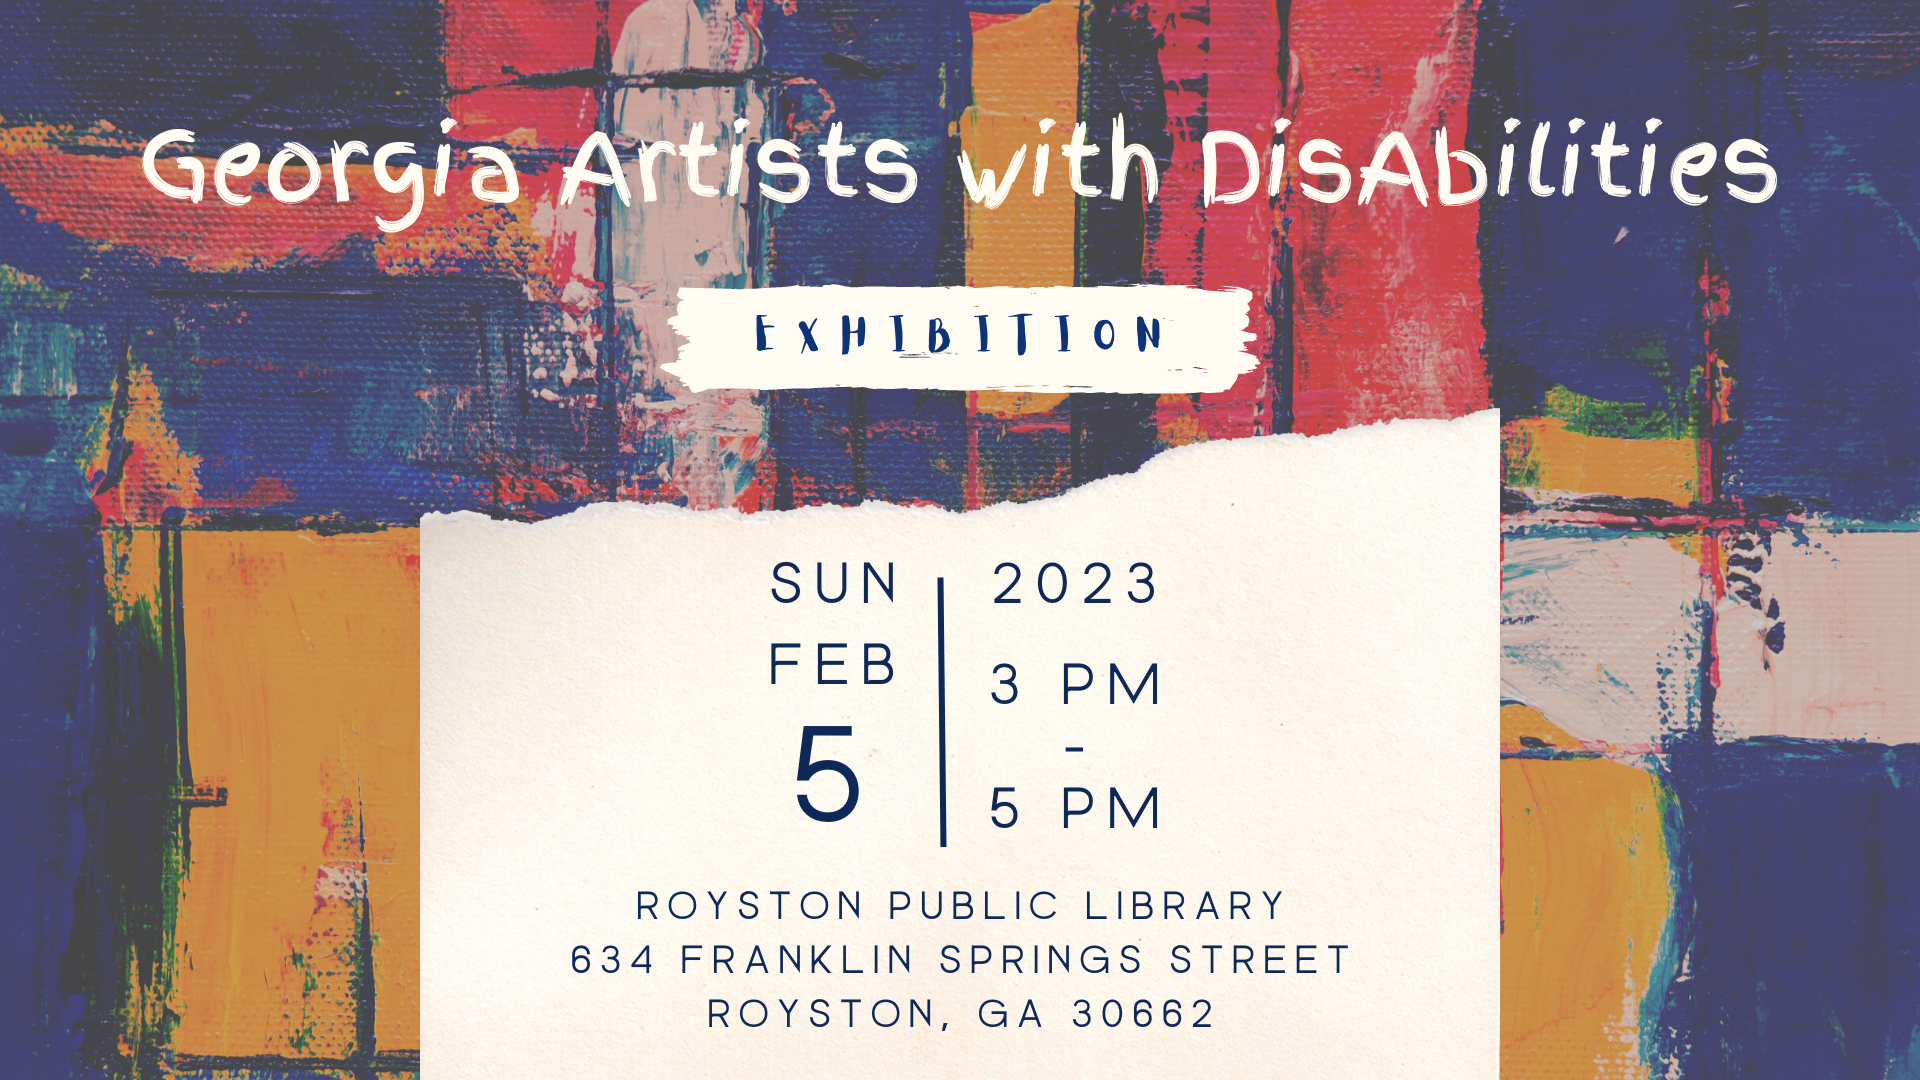 The reception for the Art Show will be on Sunday, February 5th, 2023 from 3PM - 5PM at the Royston Public Library.